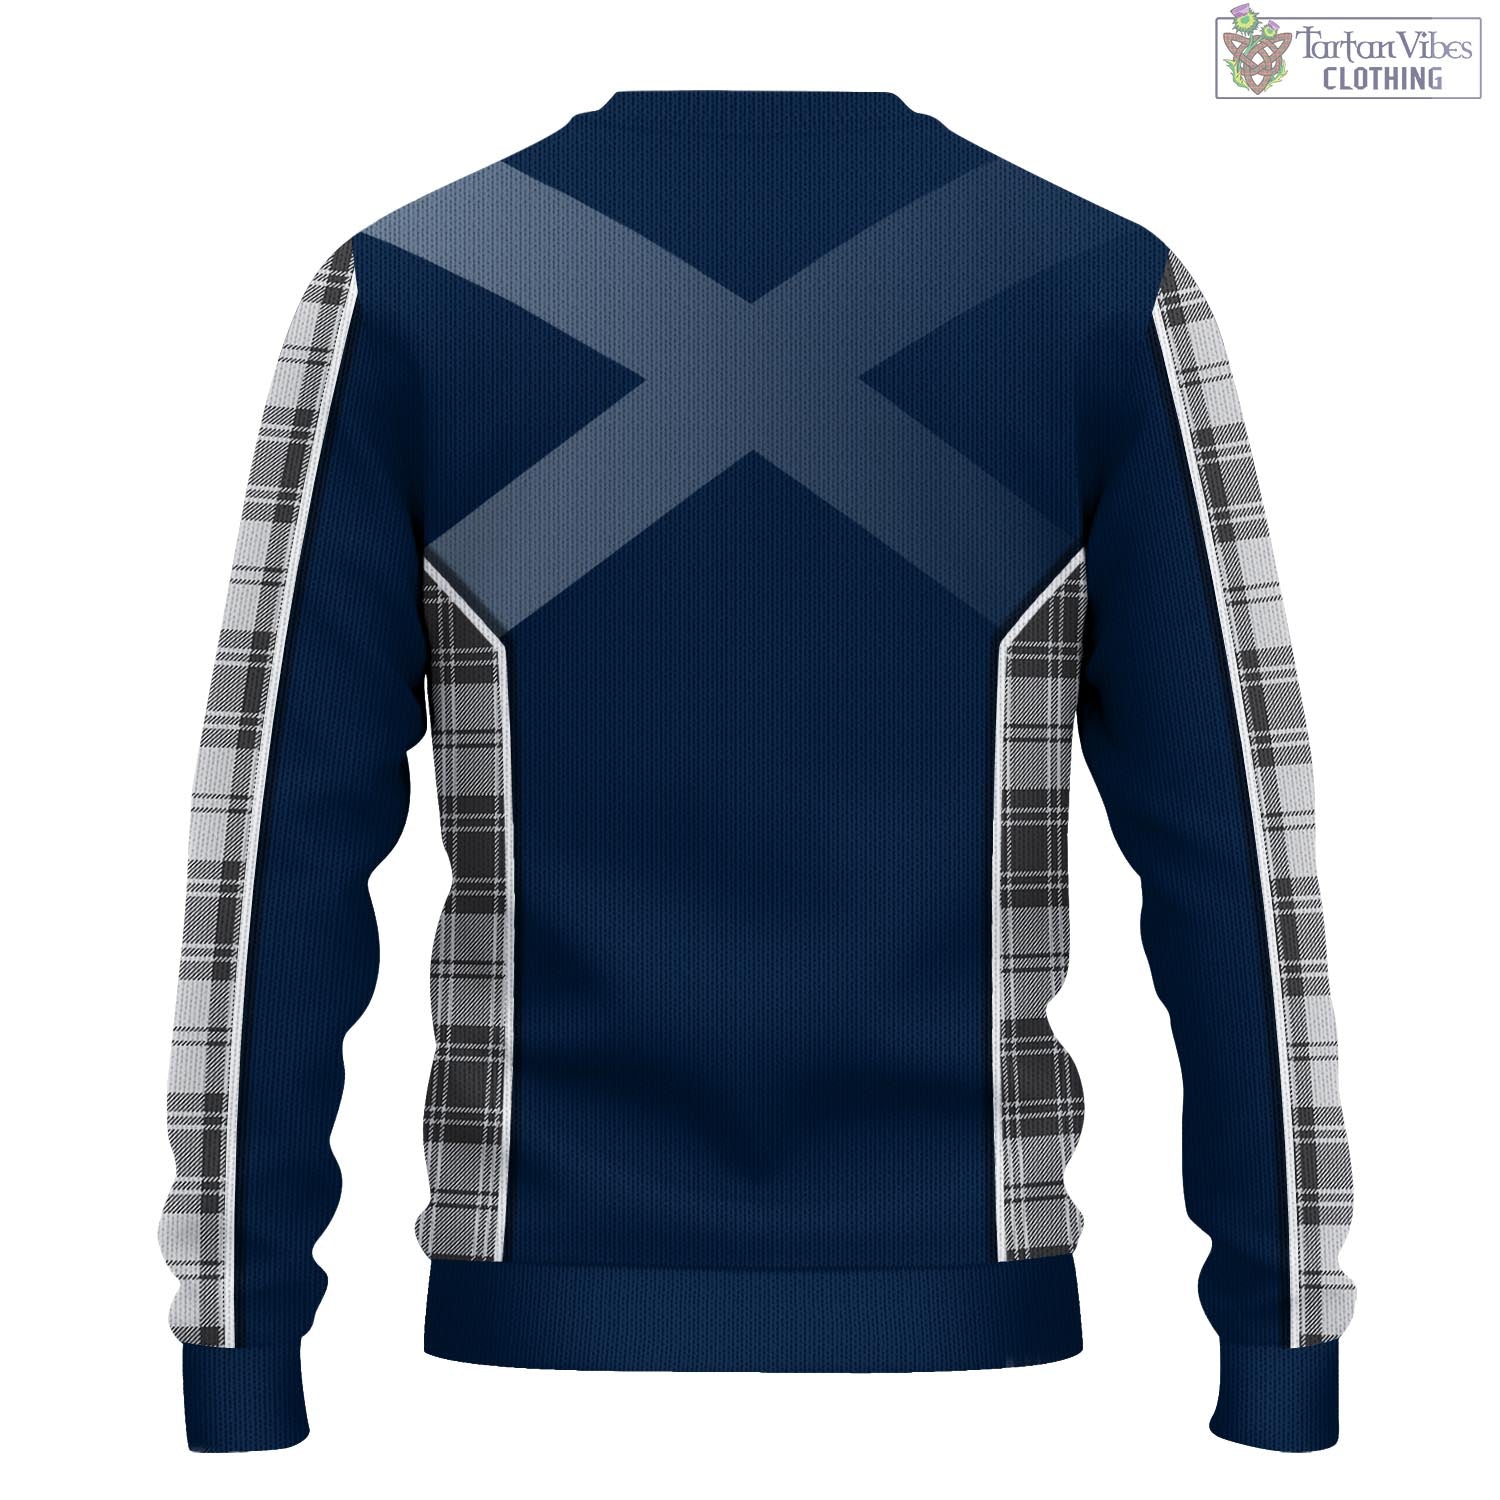 Tartan Vibes Clothing Glendinning Tartan Knitted Sweatshirt with Family Crest and Scottish Thistle Vibes Sport Style